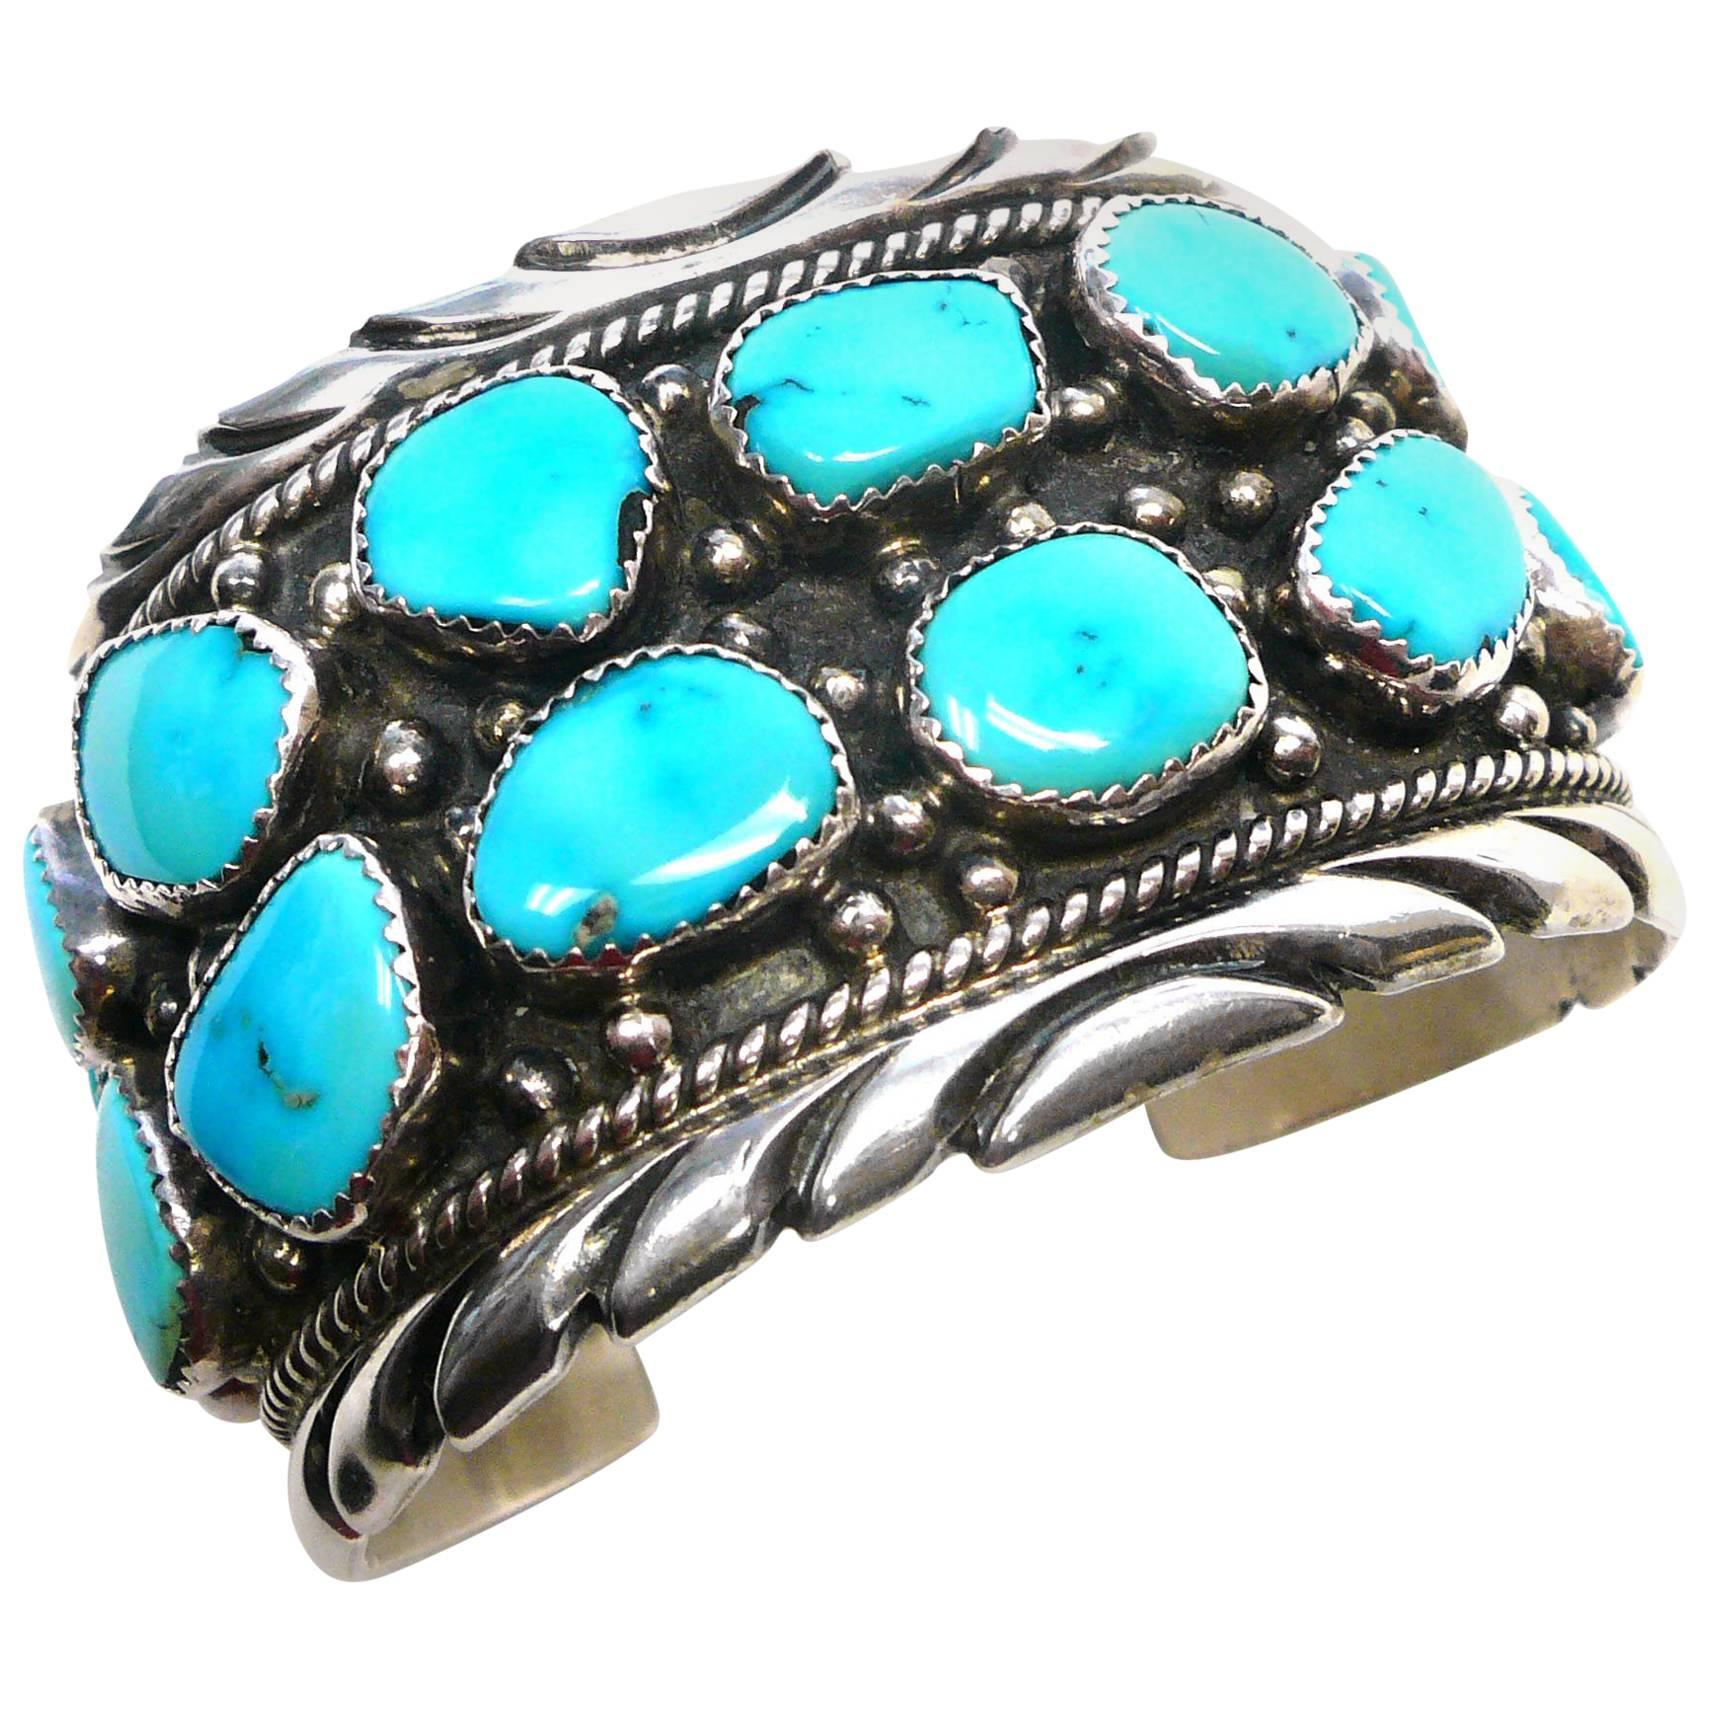 Handsome Native American Turquoise Sterling Cuff Bracelet